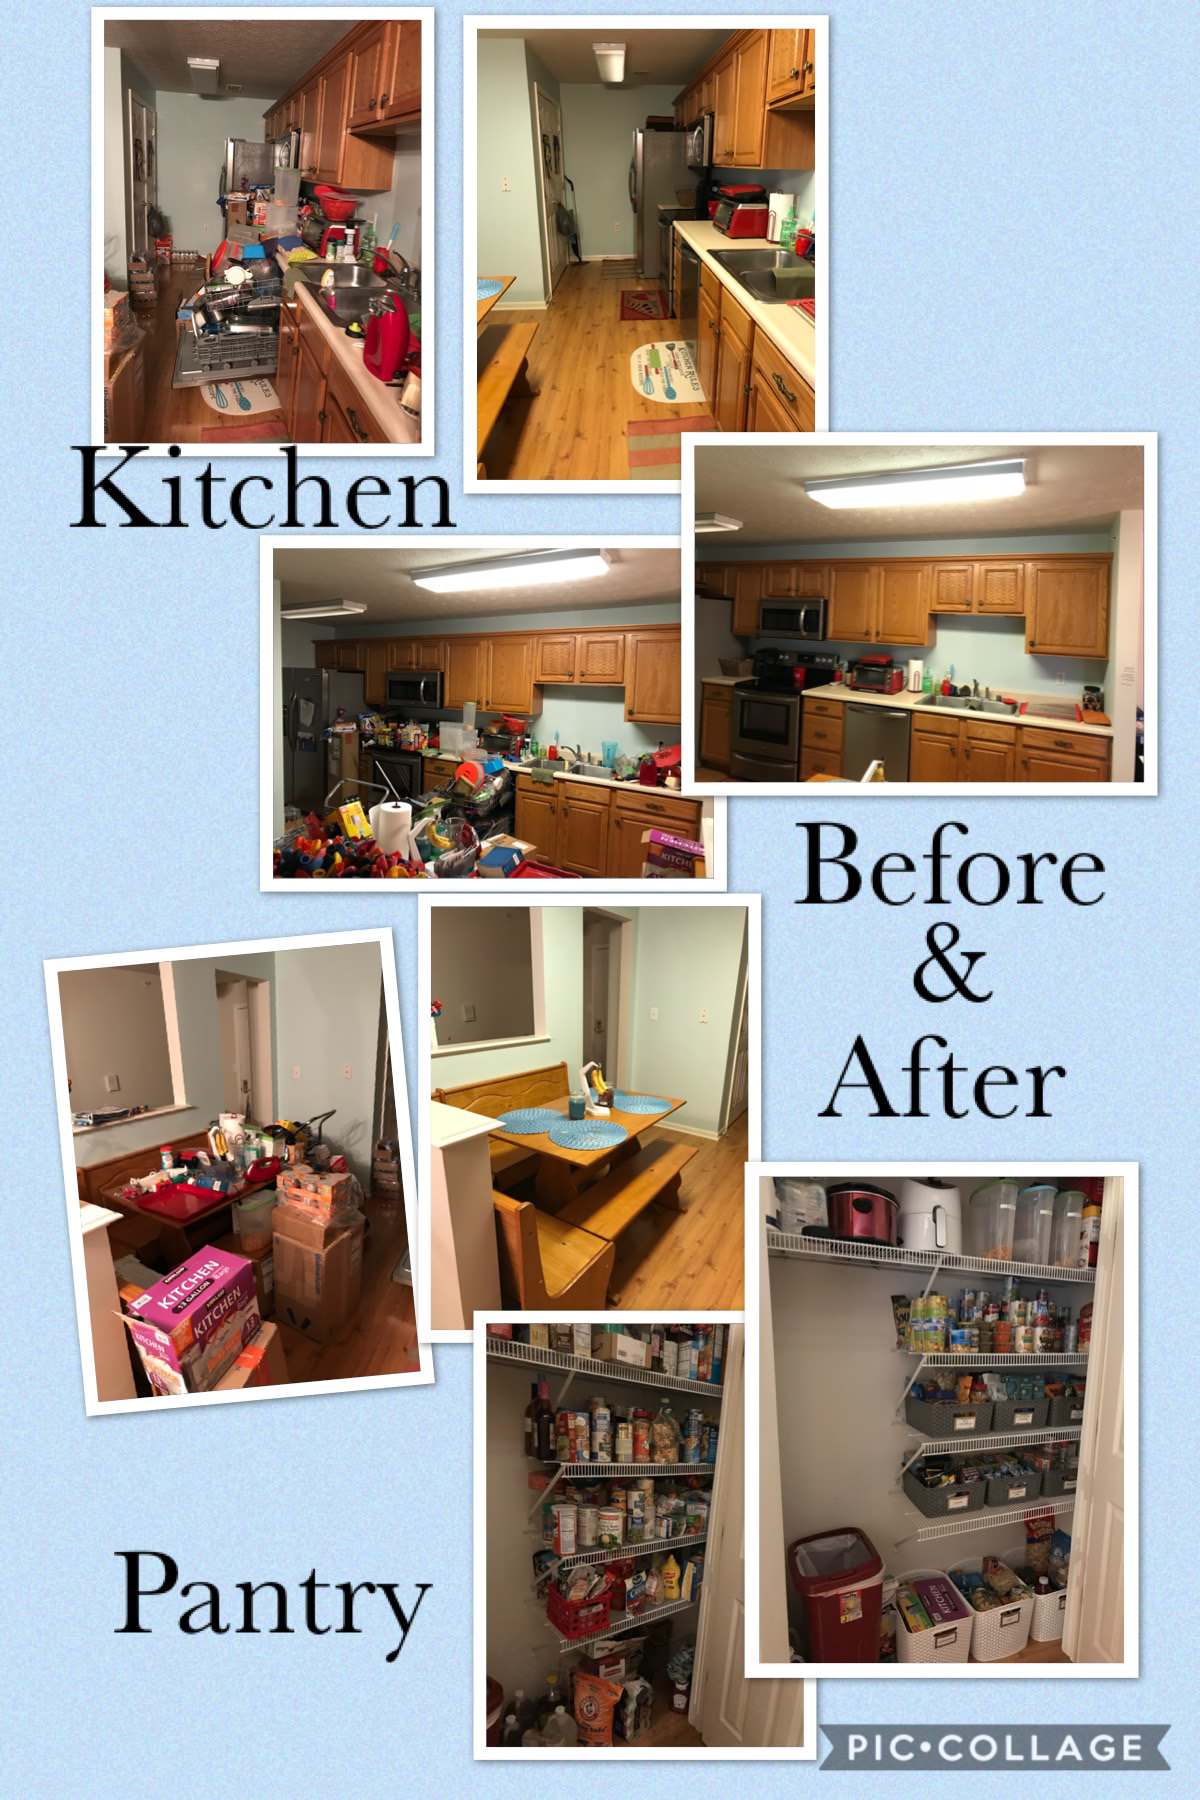 Kitchen and pantry before and after